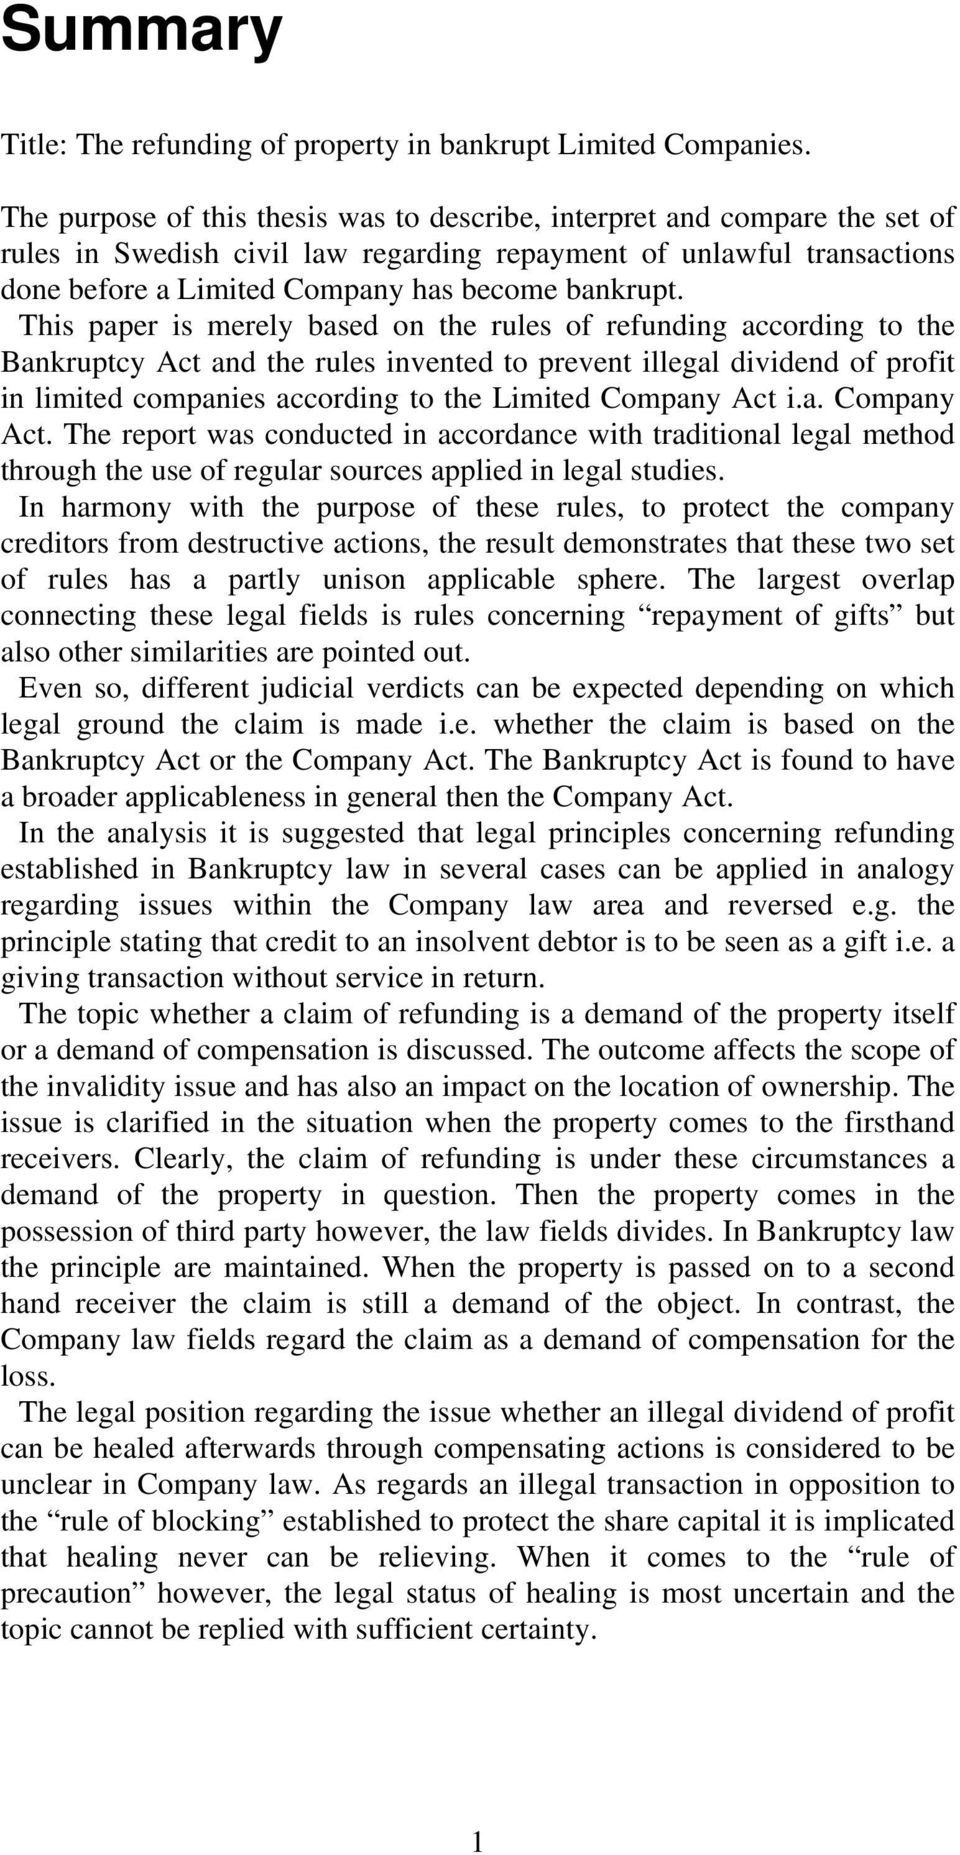 This paper is merely based on the rules of refunding according to the Bankruptcy Act and the rules invented to prevent illegal dividend of profit in limited companies according to the Limited Company